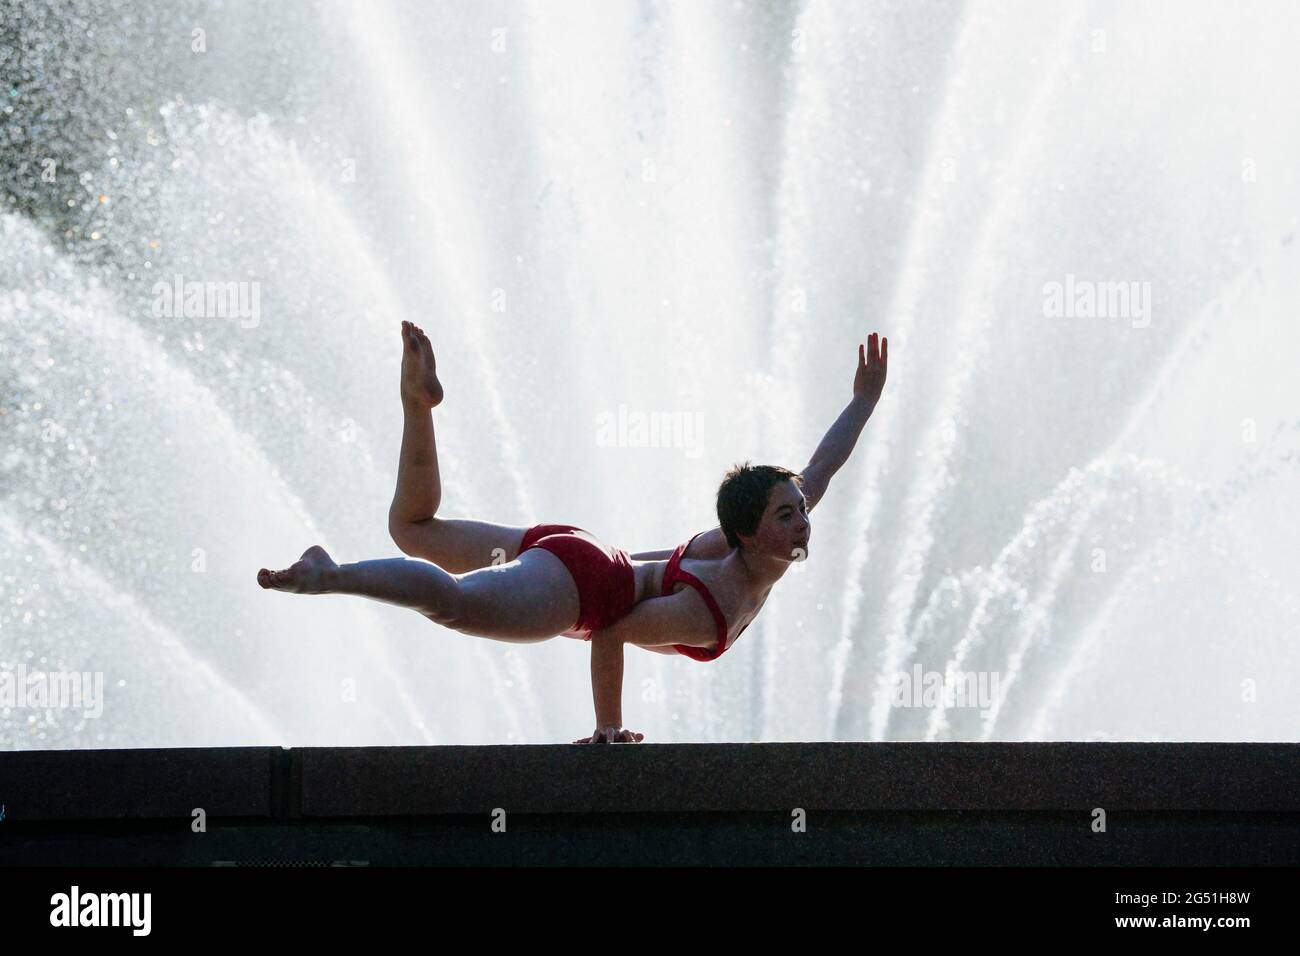 Woman doing acrobatic handstand pose against fountain Stock Photo